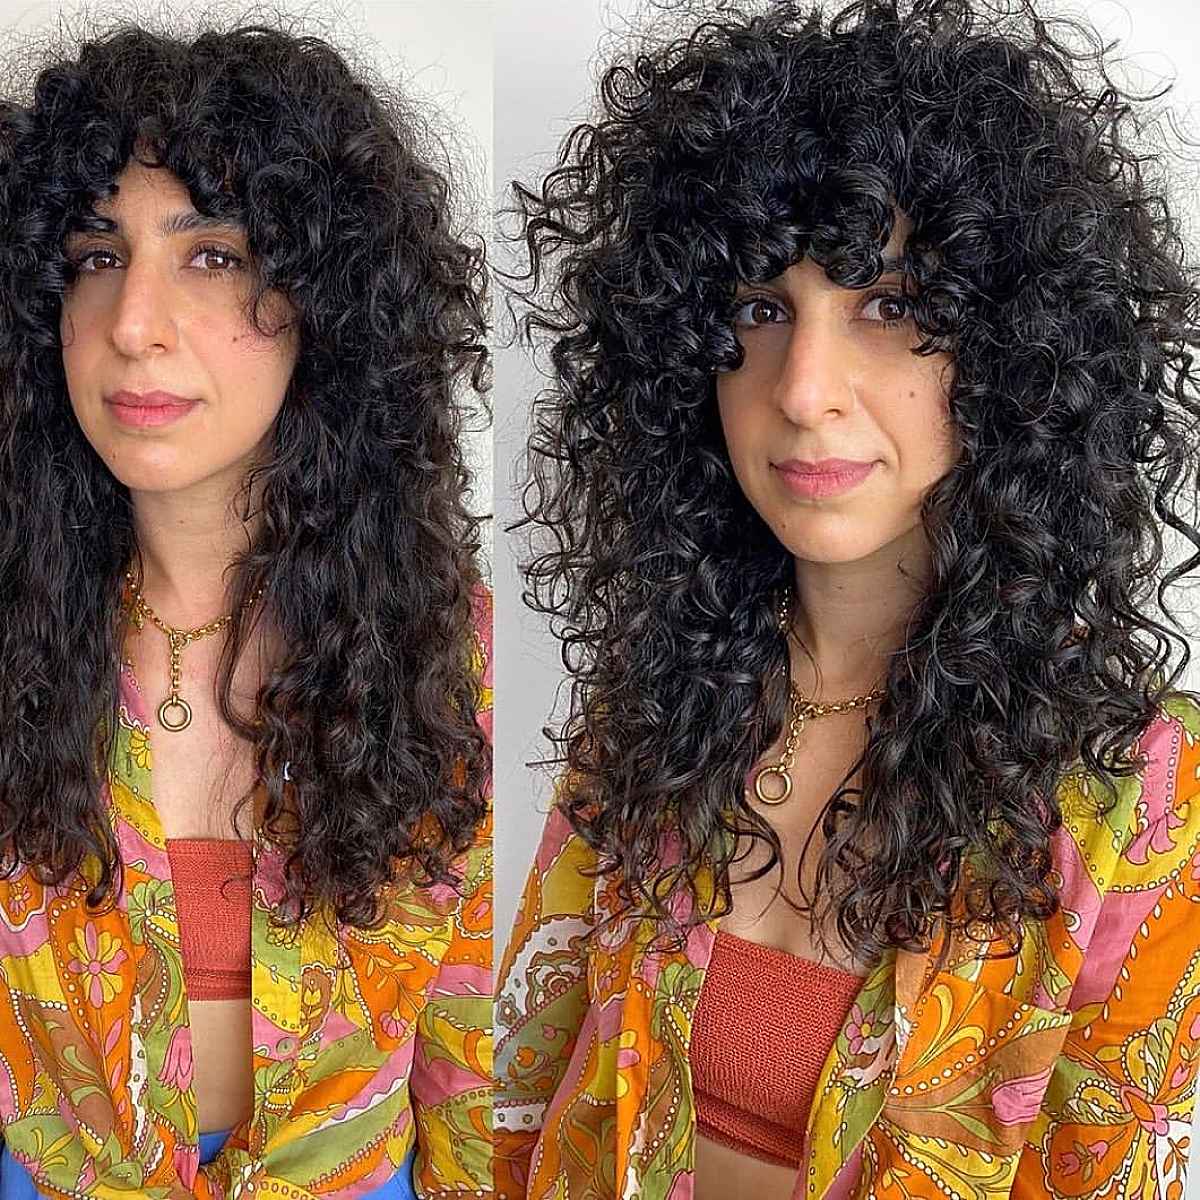 Curly Layered Hair with Curly Bangs